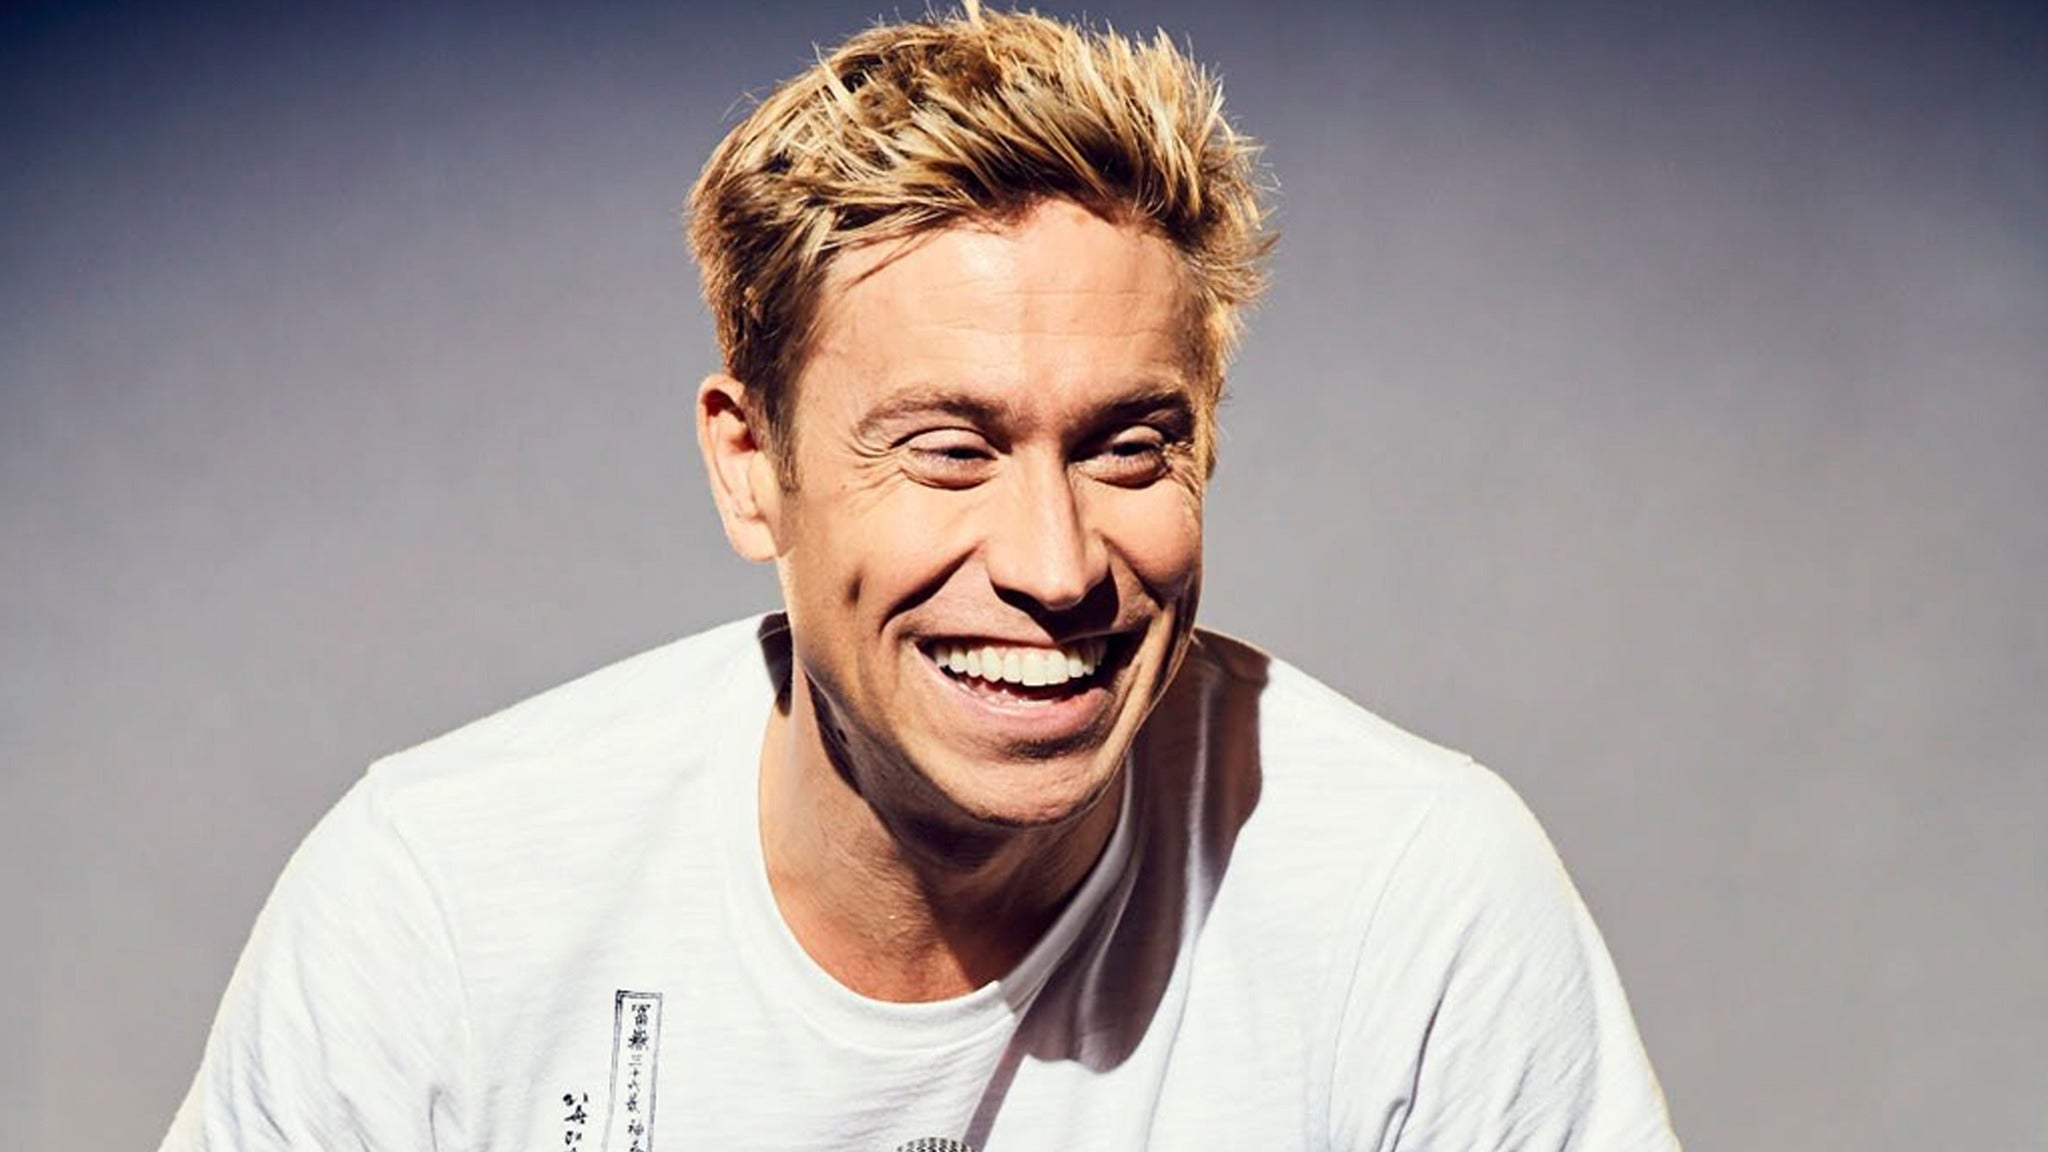 Russell Howard in Minneapolis promo photo for Ticketmaster presale offer code